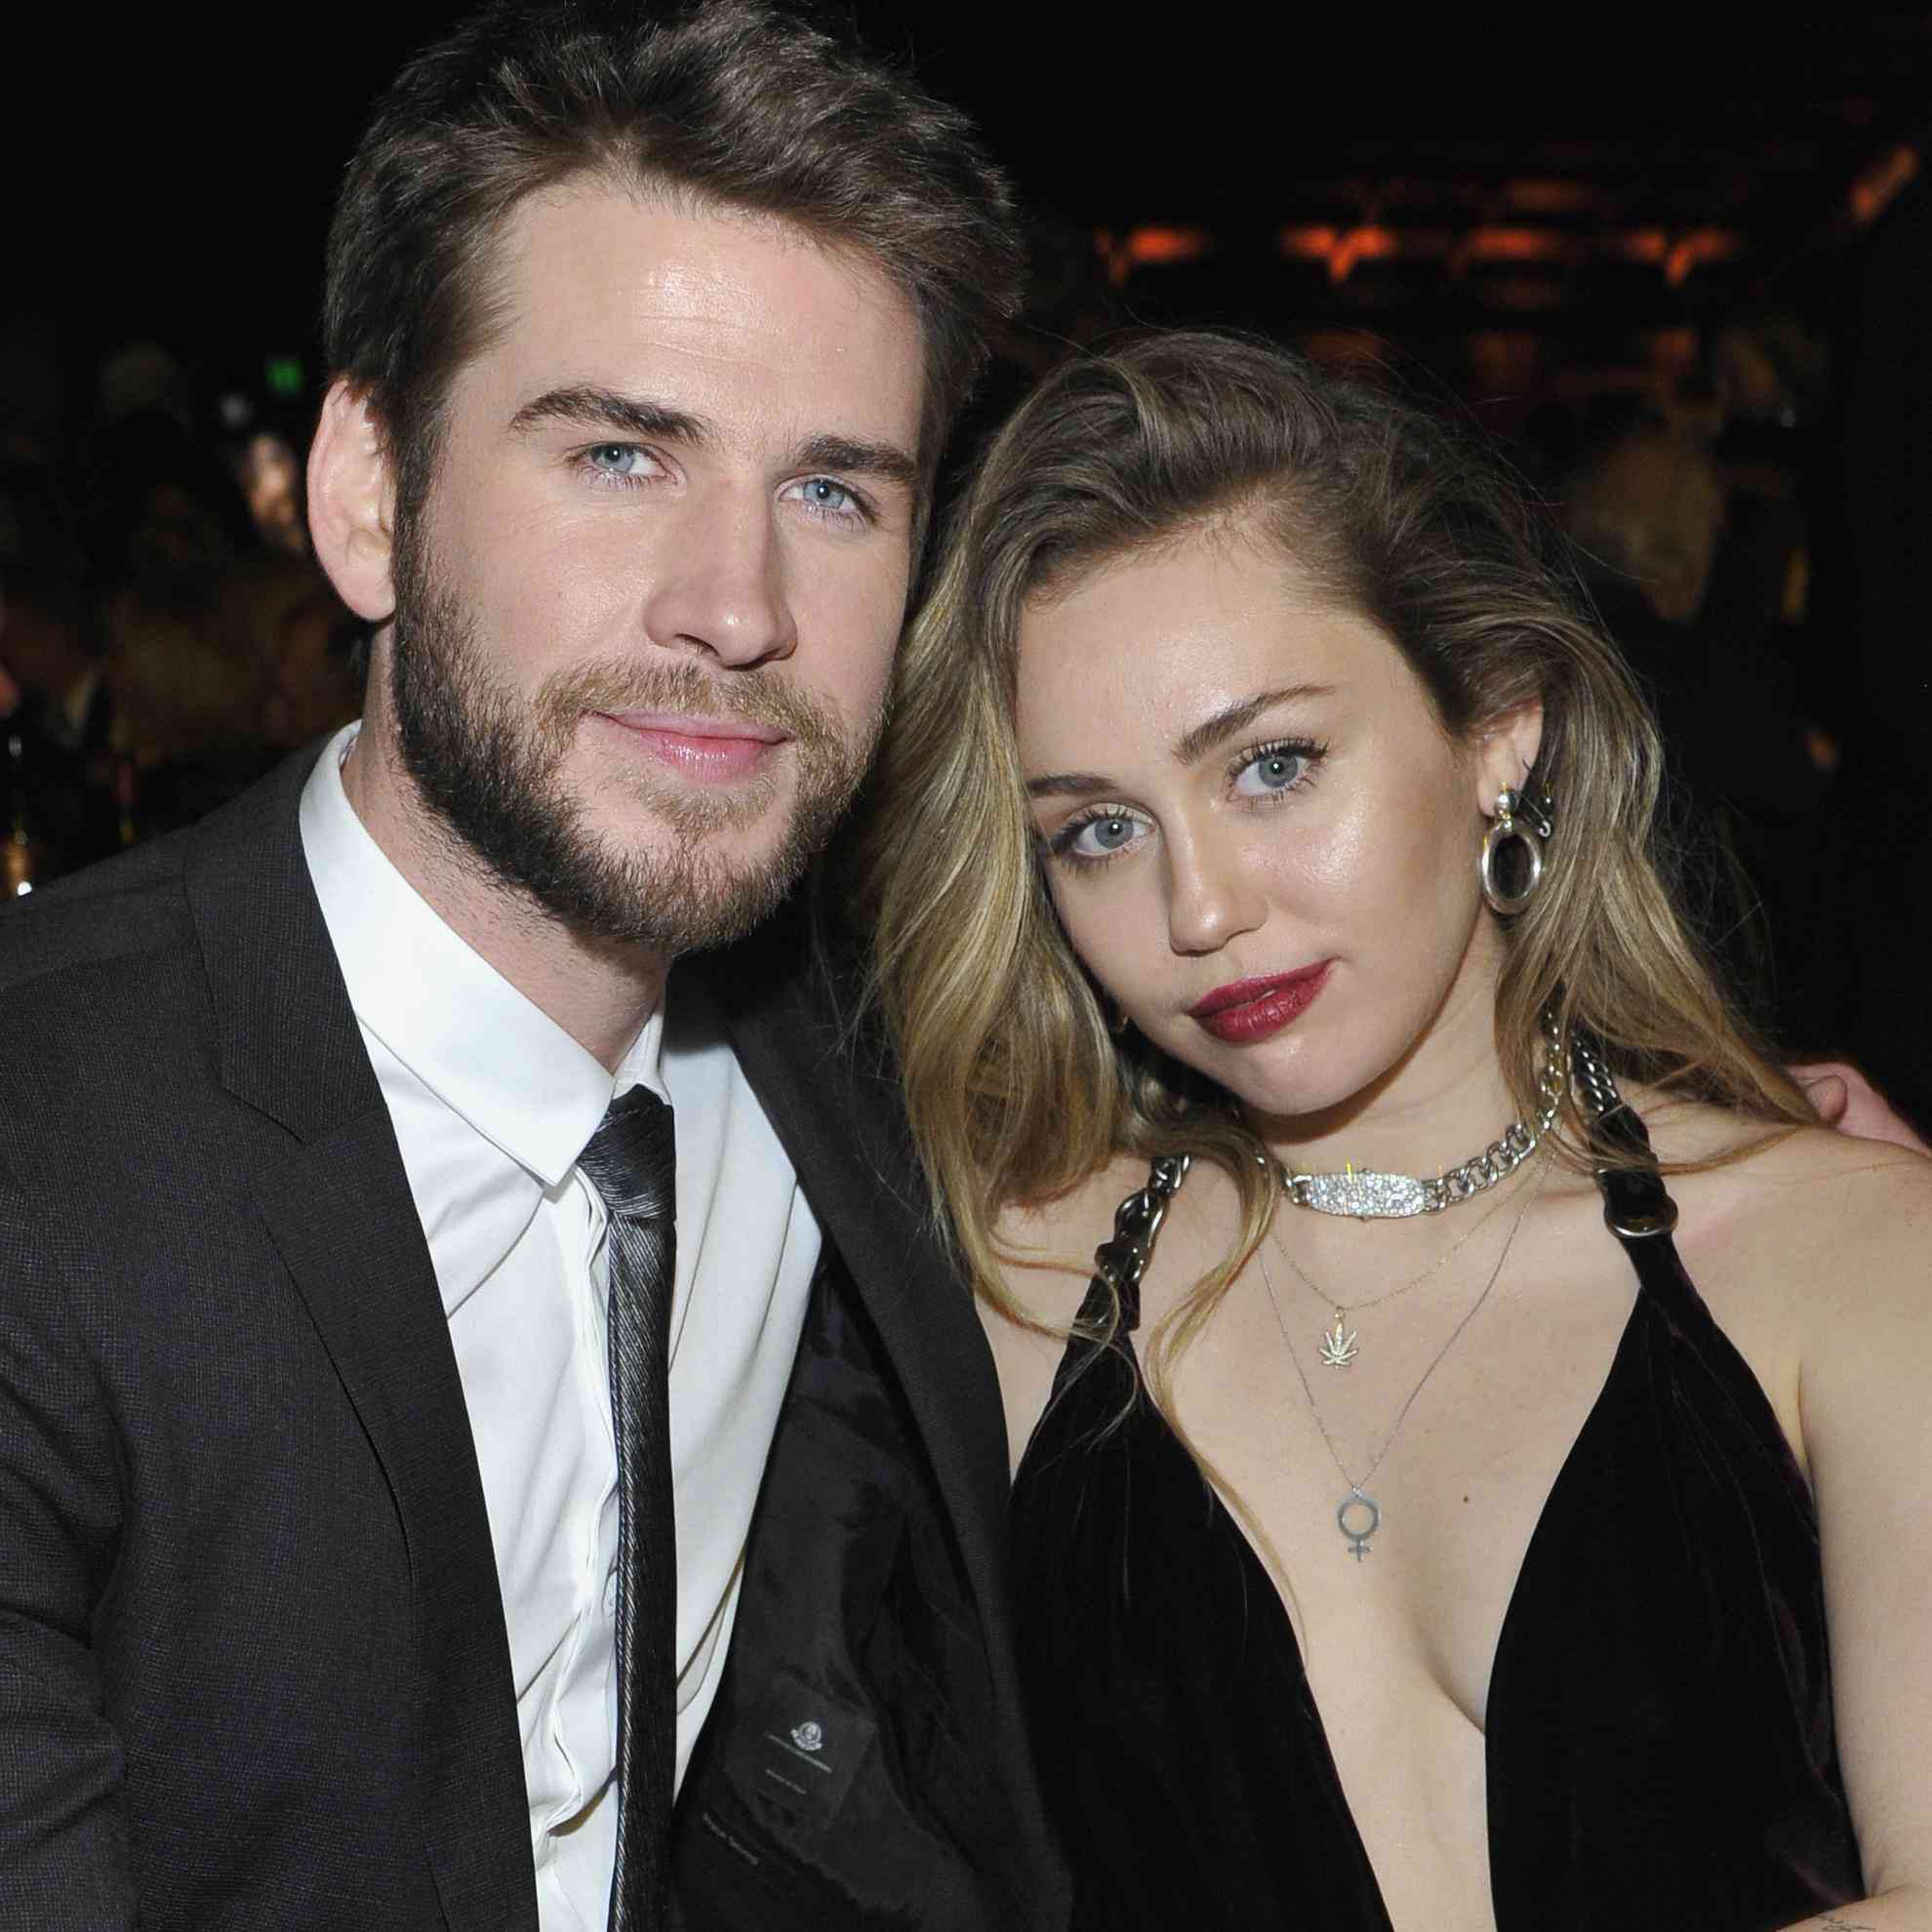 Liam Hemsworth's sister-in-law opens up about his split with Miley Cyrus